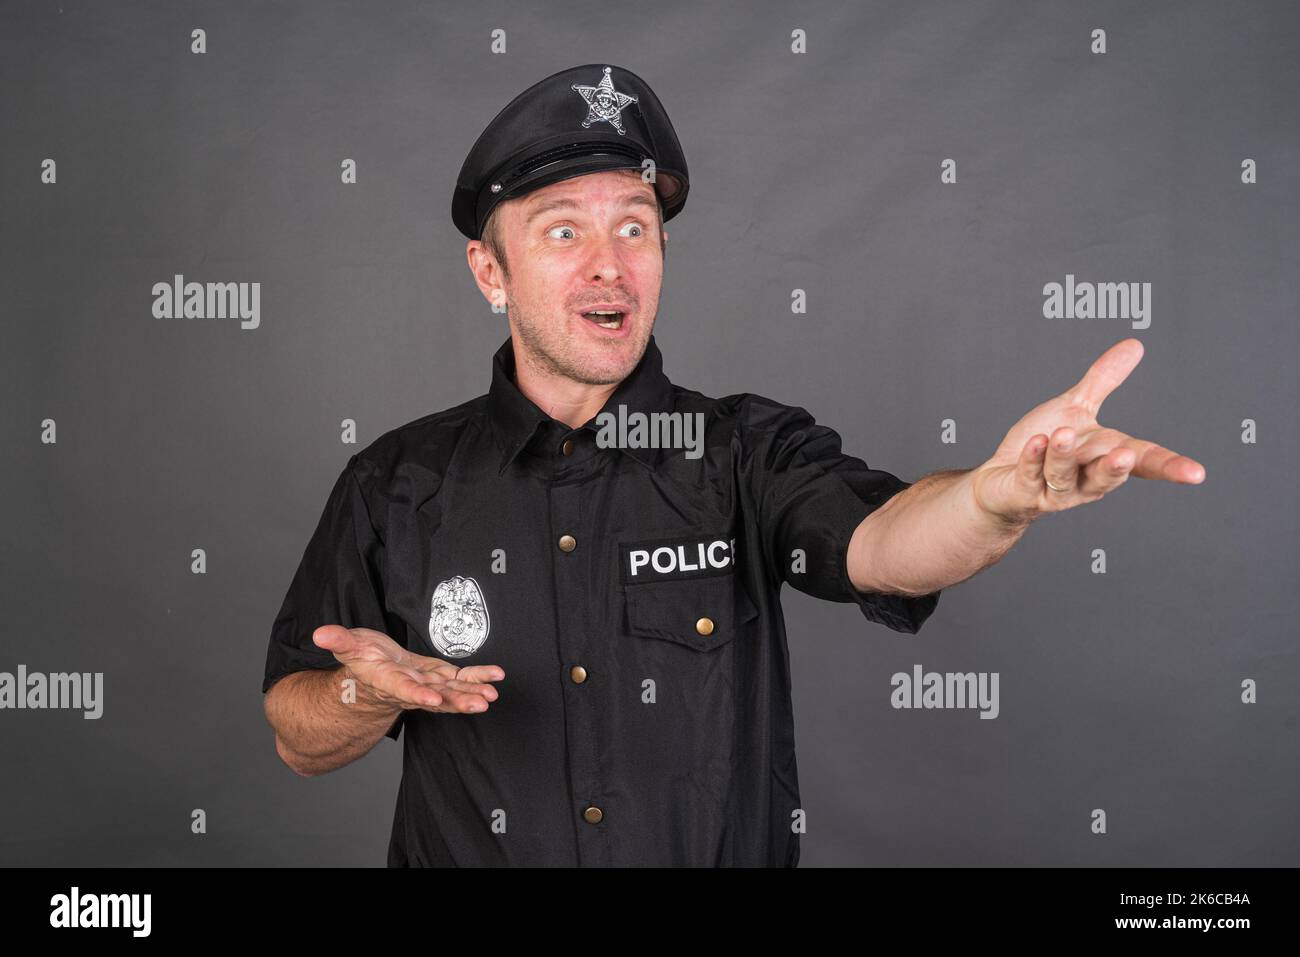 Frustrated Caucasian man wearing police uniform costume against gray studio background Stock Photo